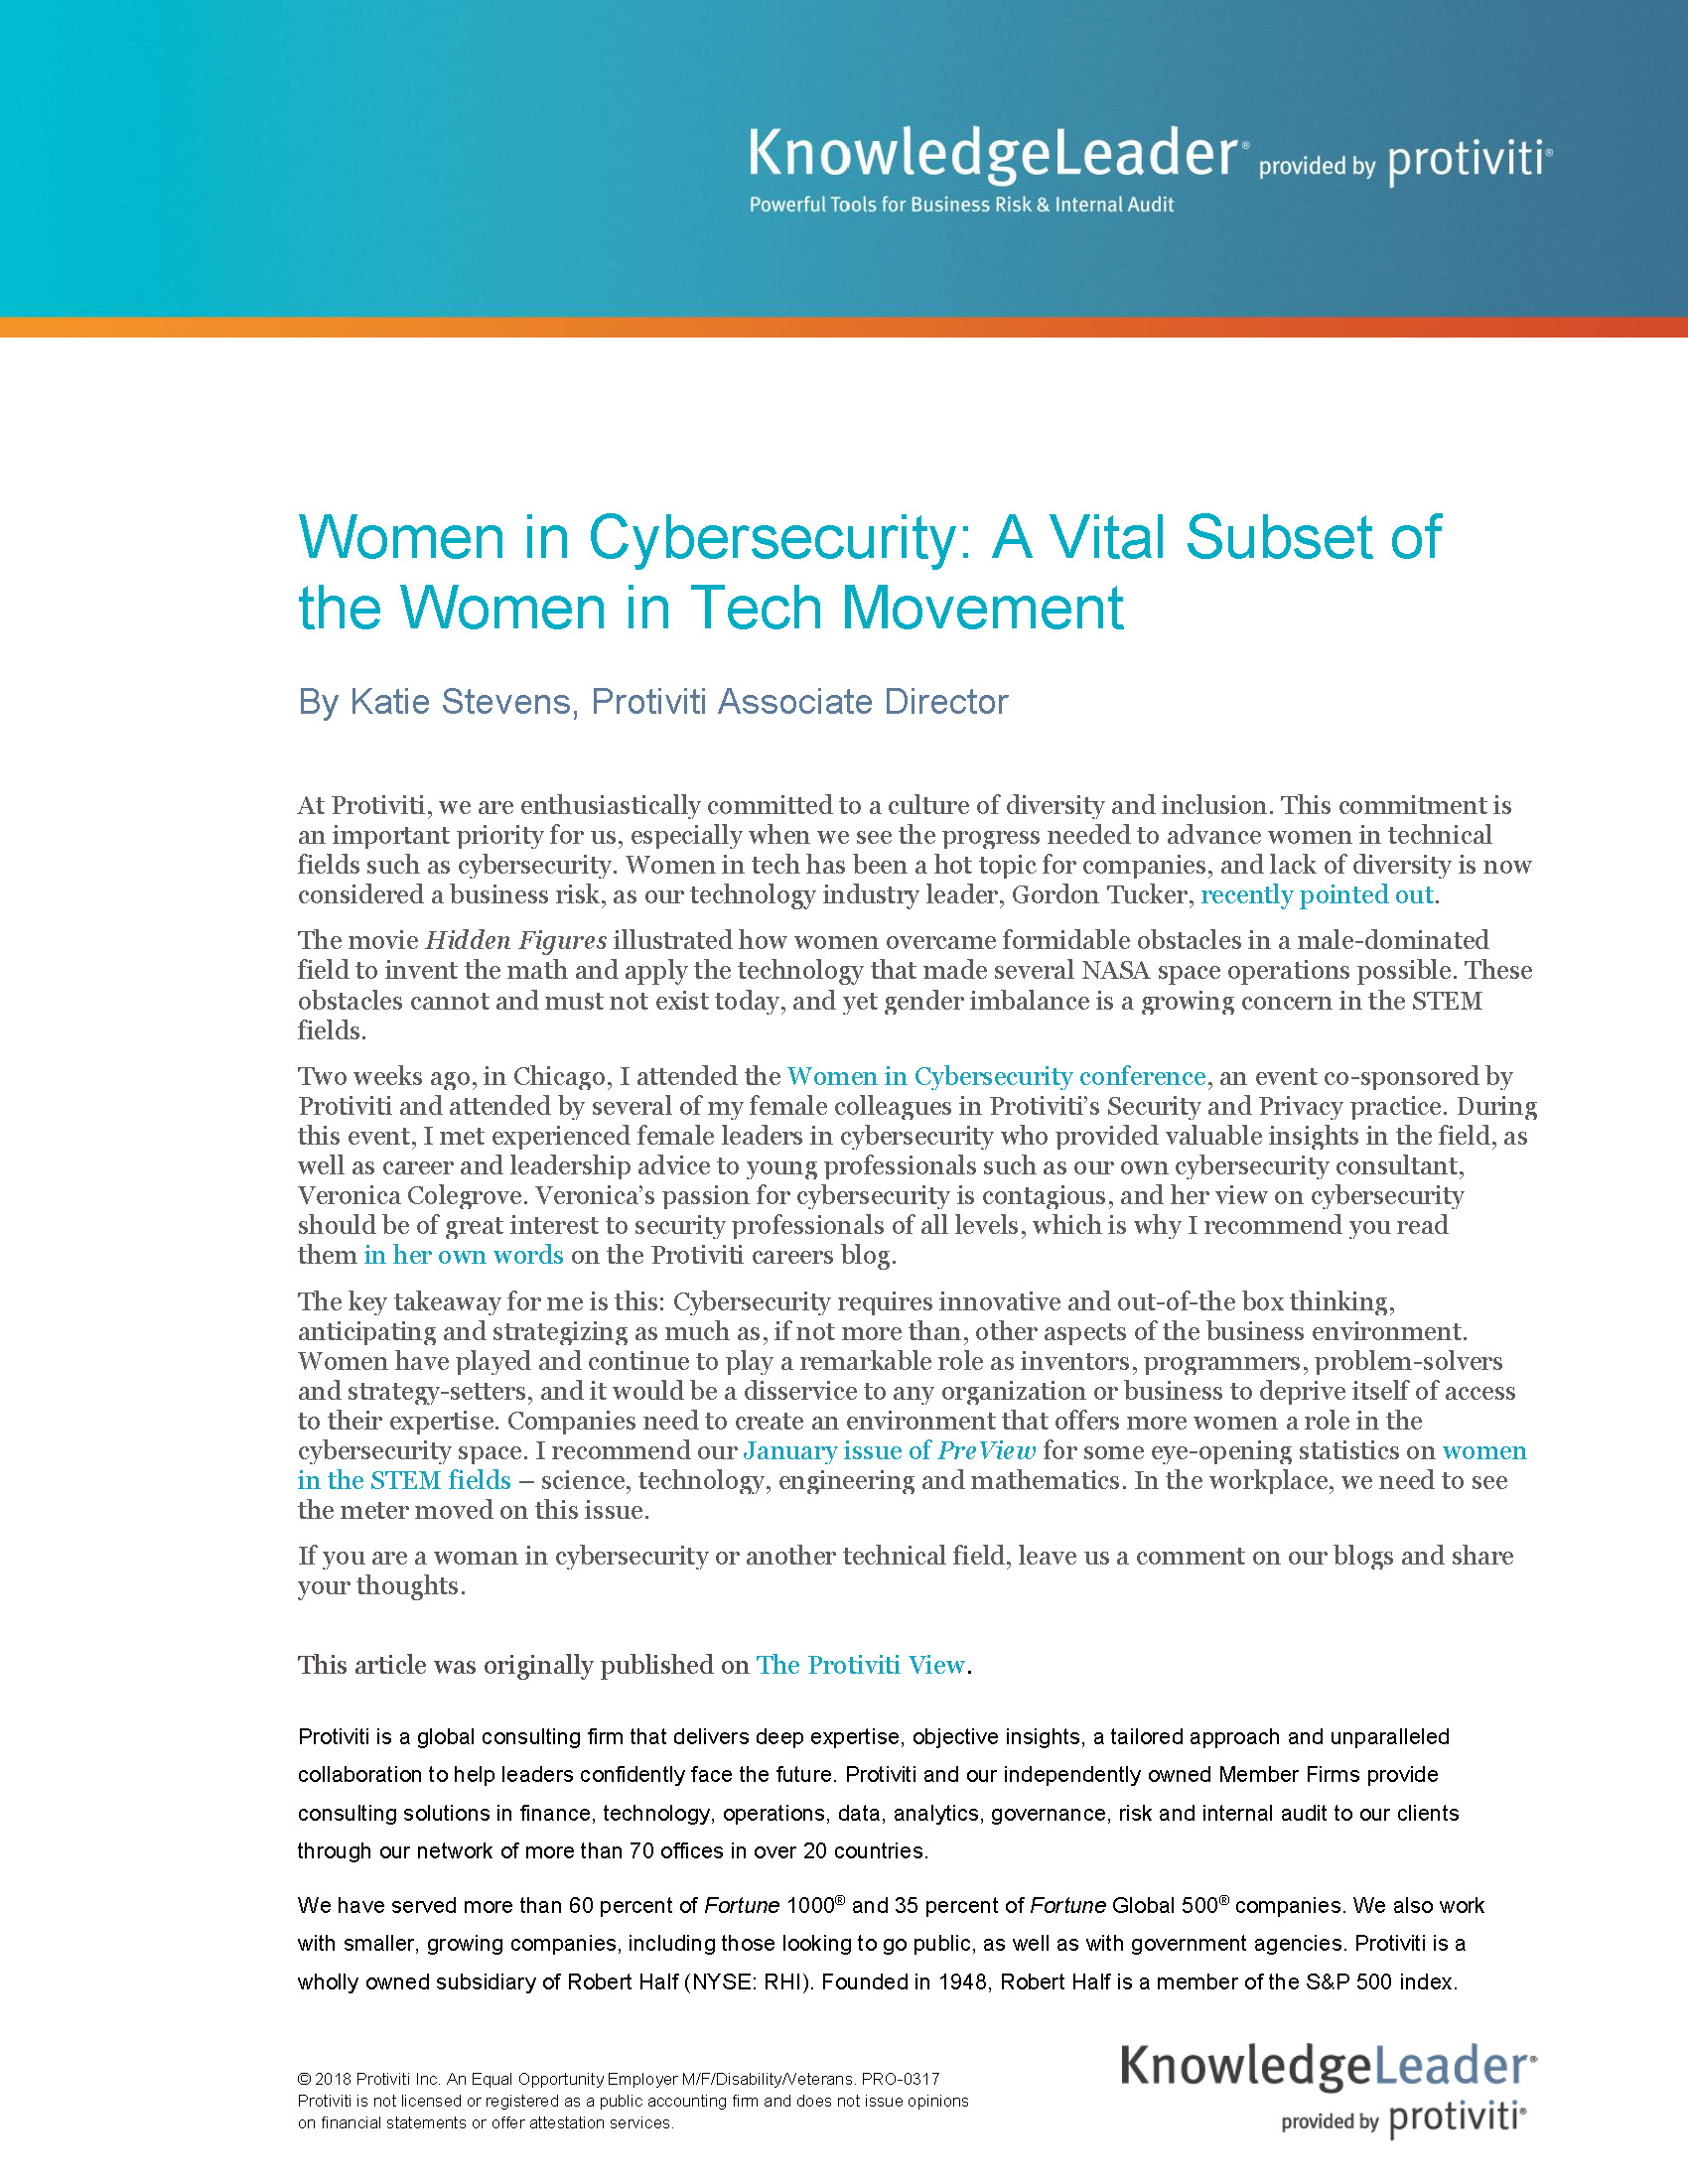 Screenshot of the first page of Women in Cybersecurity: A Vital Subset of the Women in Tech Movement